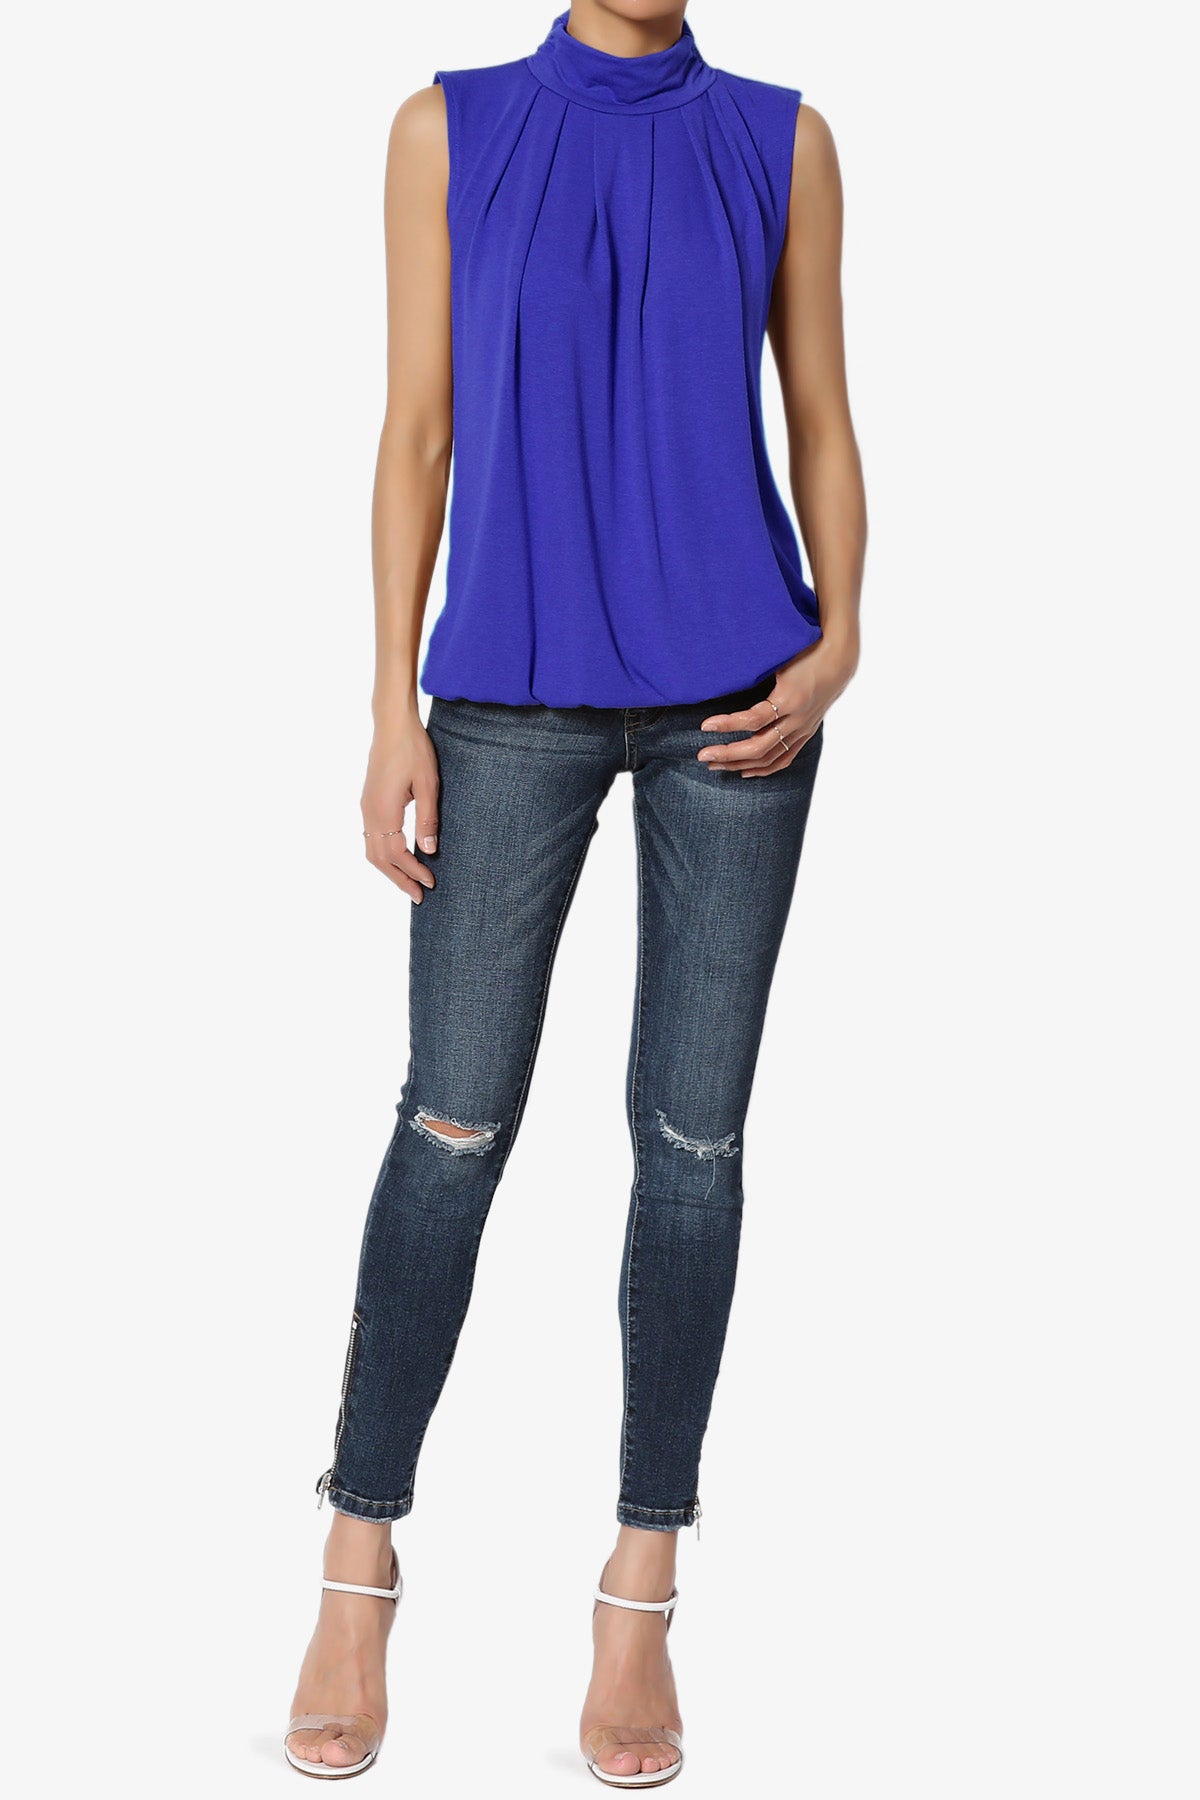 Load image into Gallery viewer, Jibbitz Sleeveless Mock Neck Pleated Top BRIGHT BLUE_6
